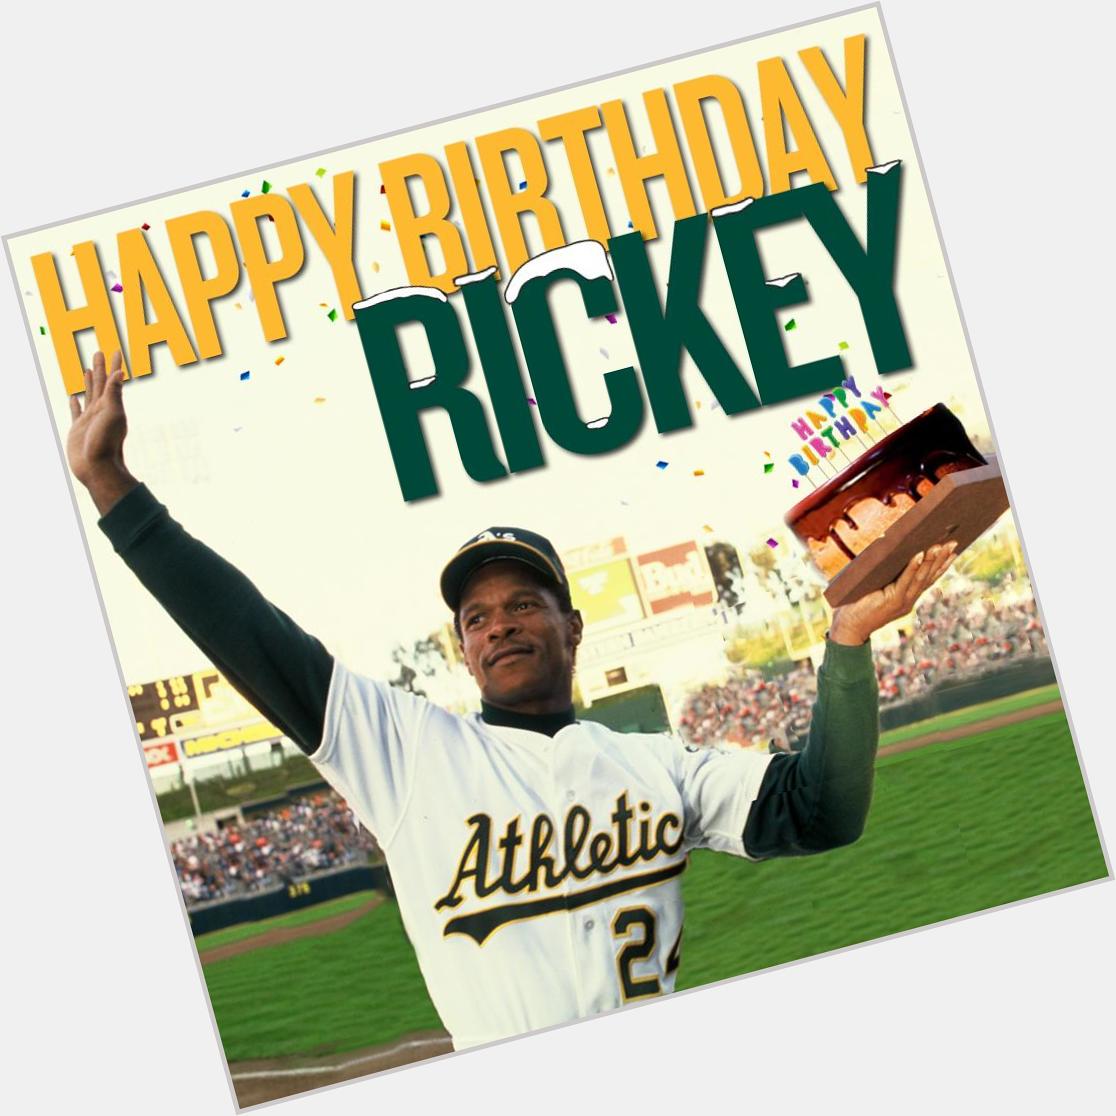   The happiest of birthdays to Hall of Famer, Rickey Henderson.   happy Bday to one of my childhood heros!